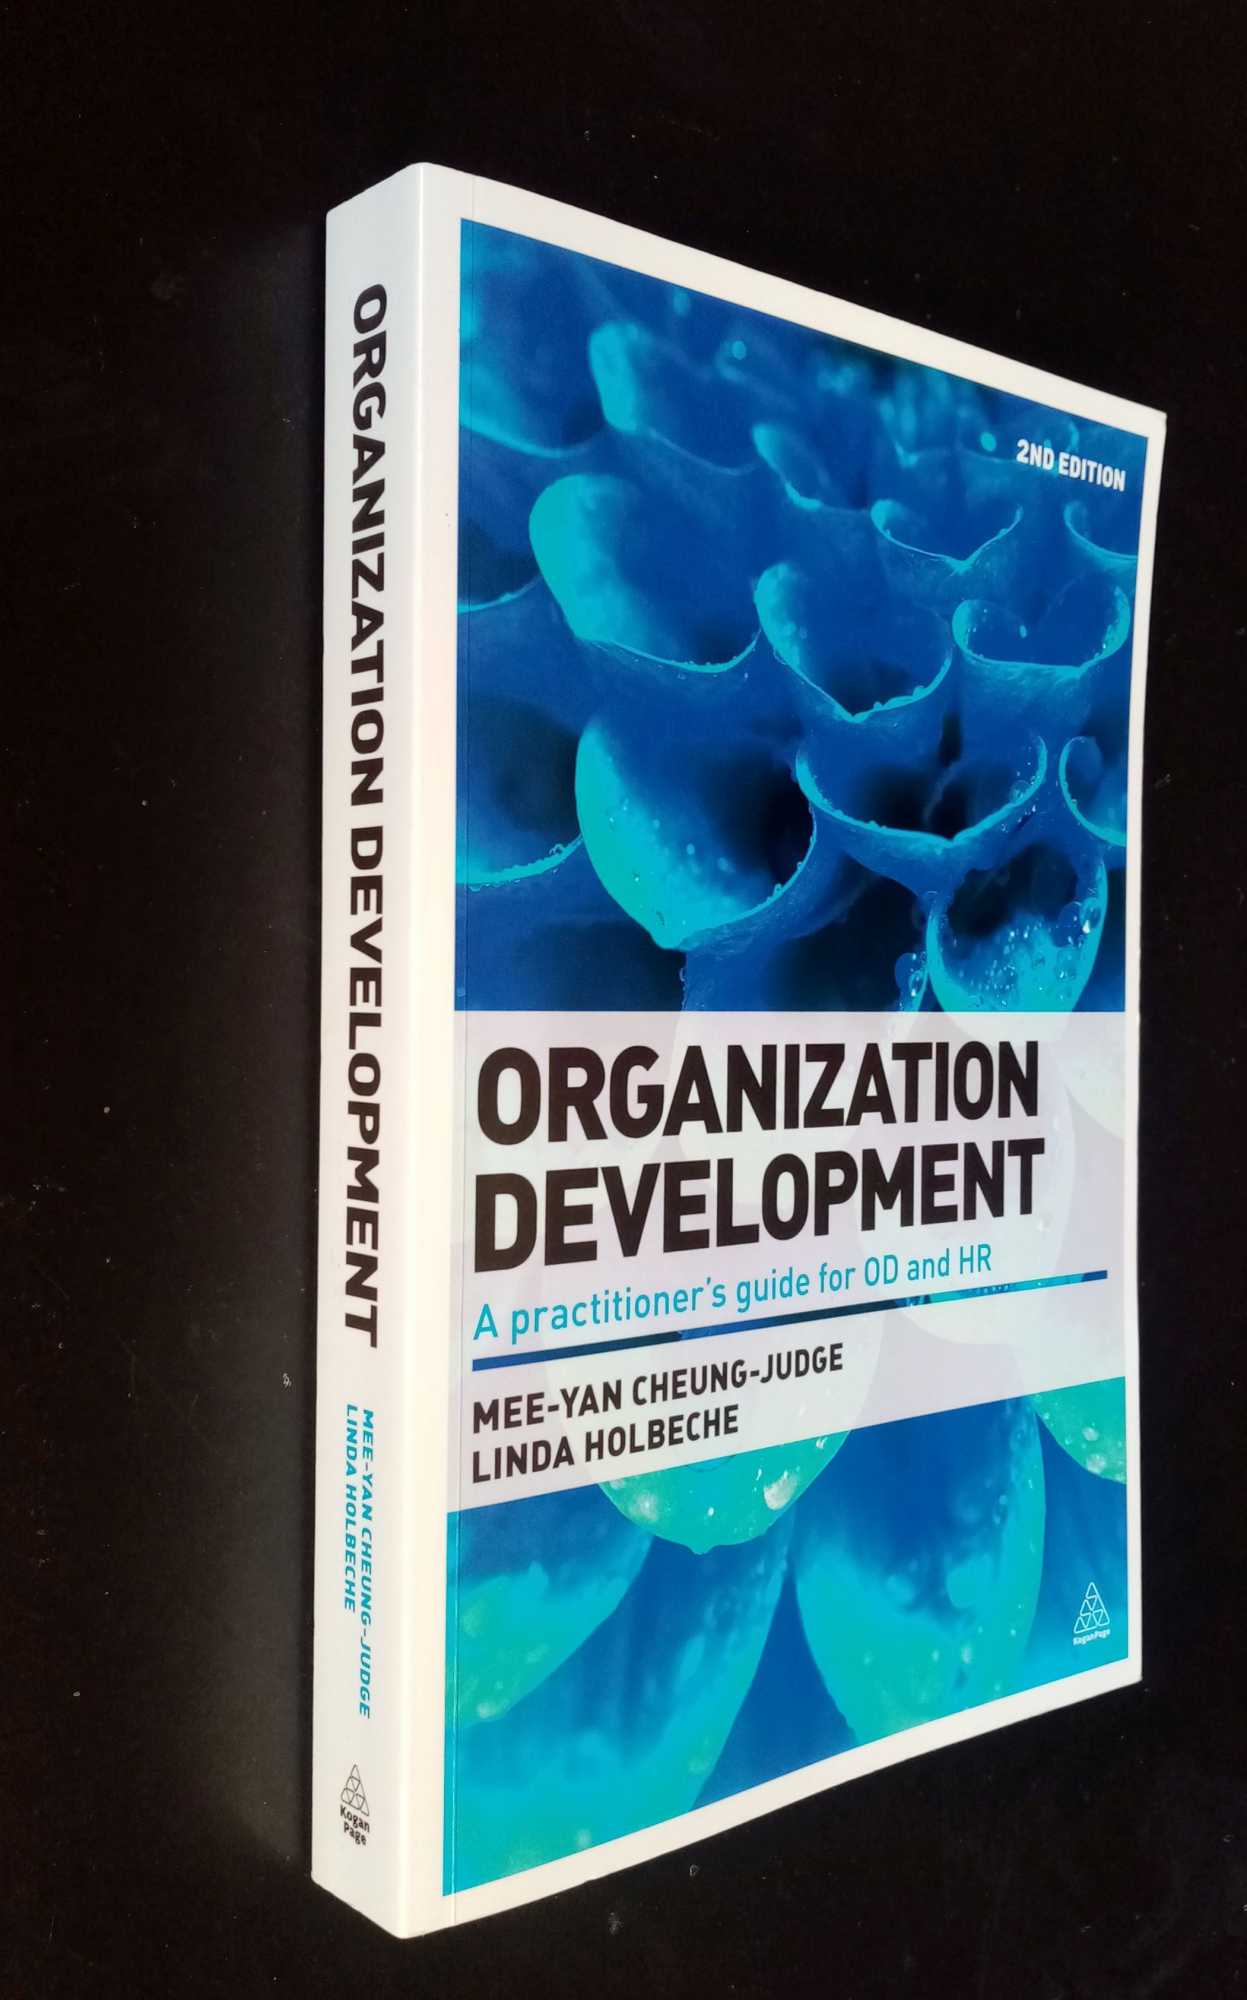 Mee-Yan Cheung-Judge, Linda Holbeche - Organization Development: A Practitioner's Guide for OD and HR  2nd. Edition, 2015